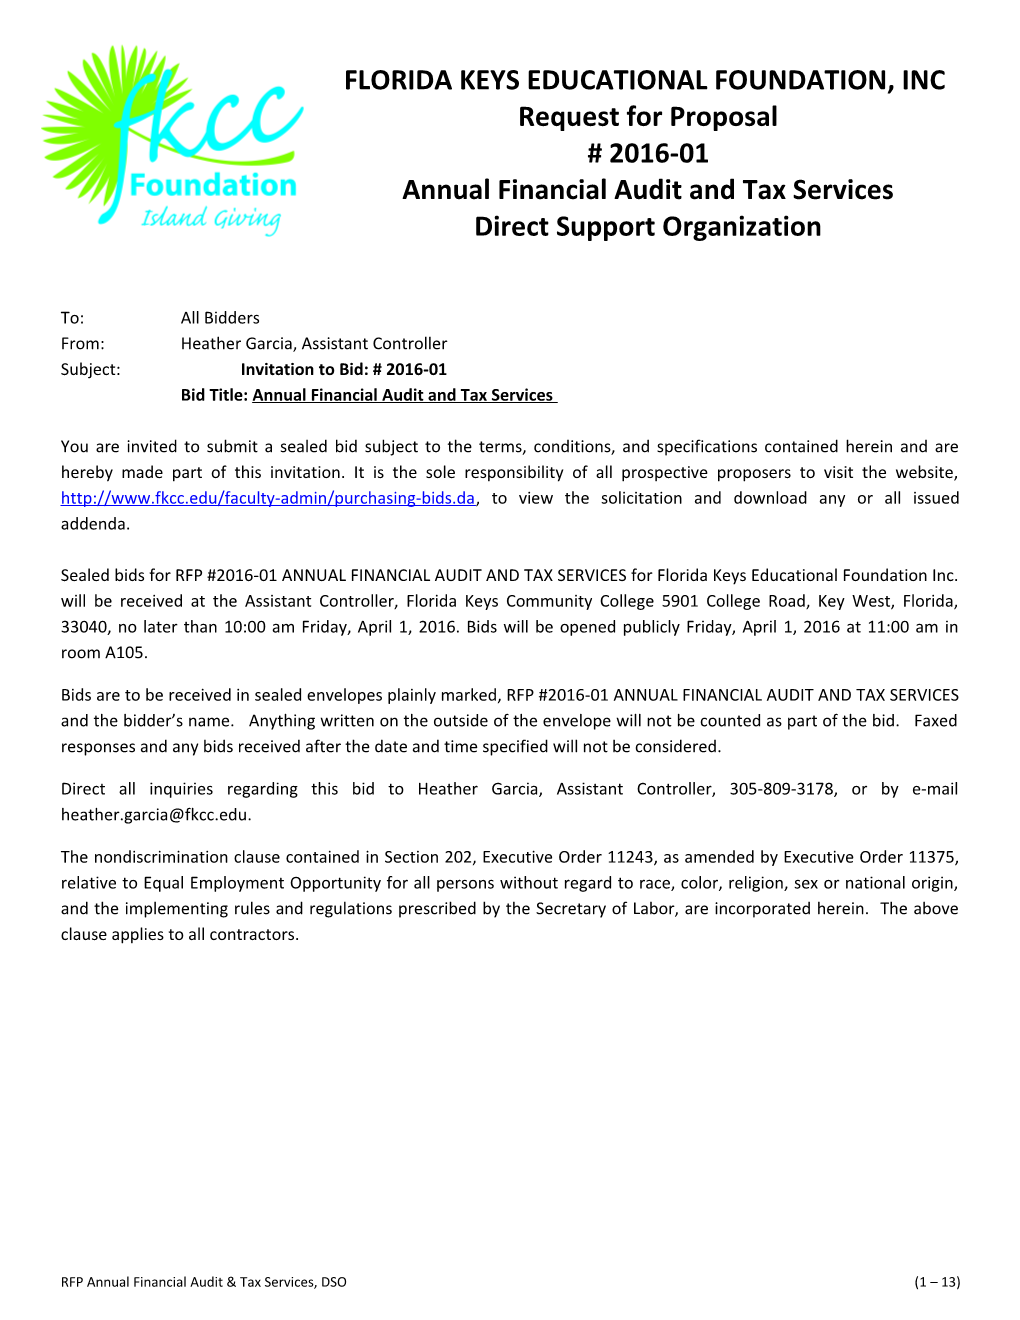 Annual Financial Audit and Tax Services